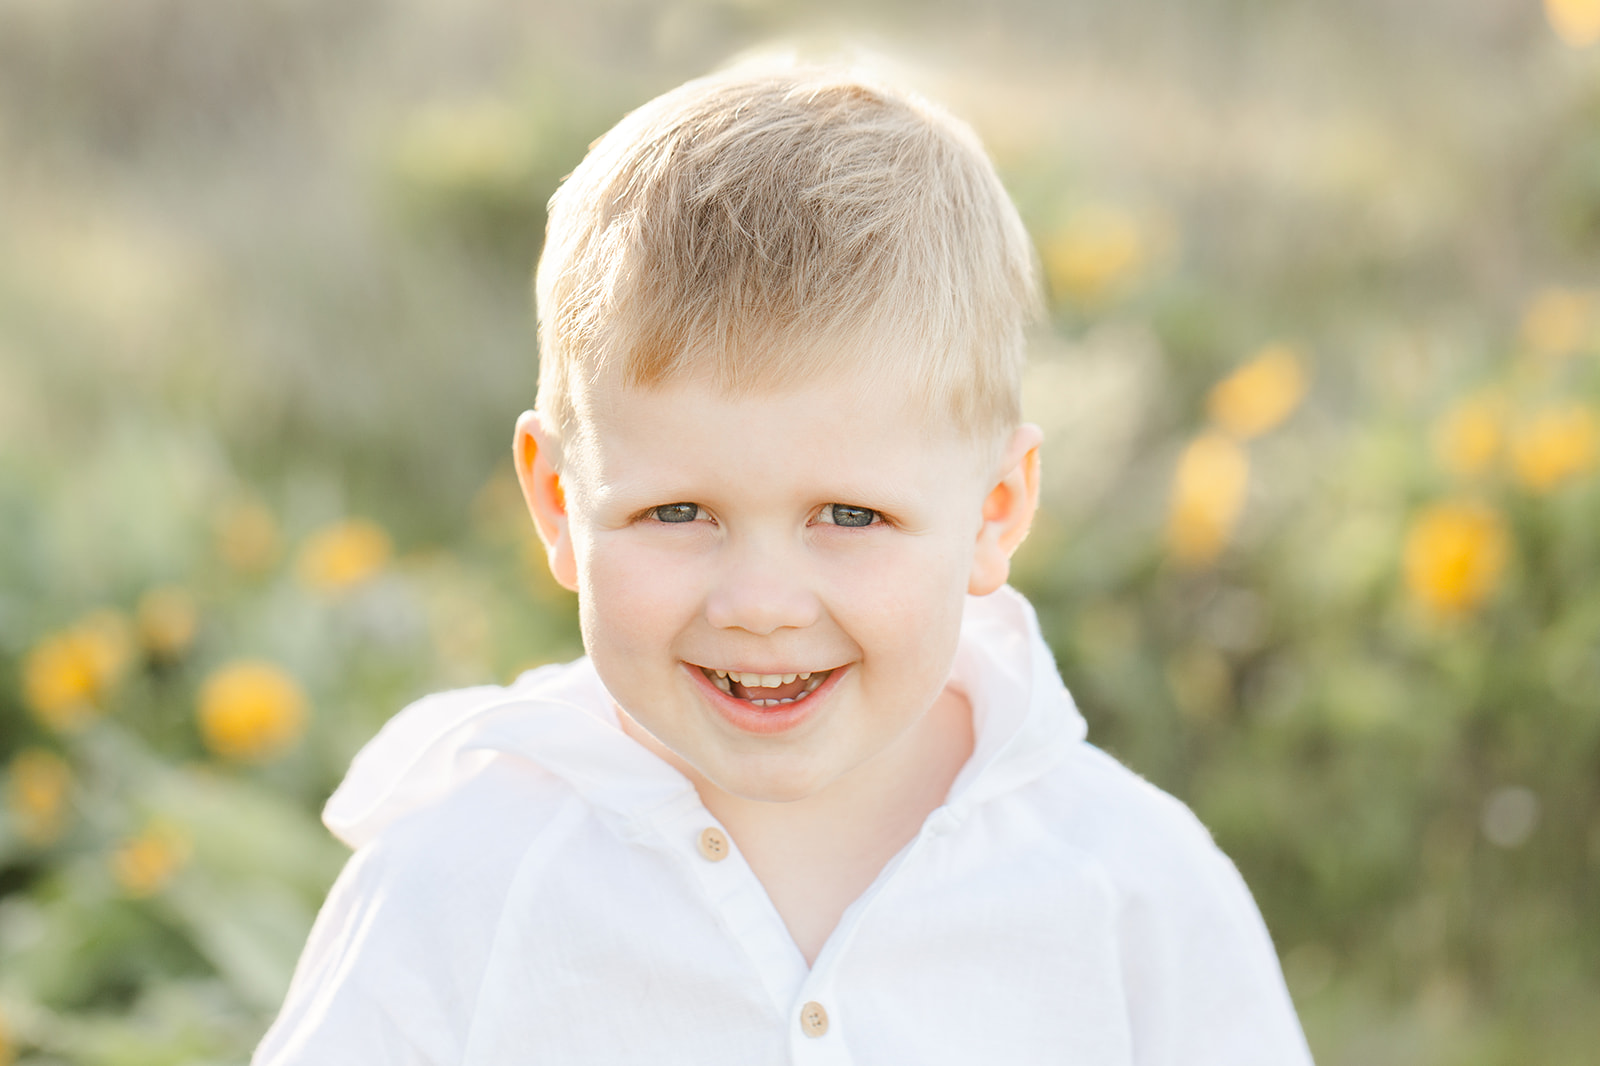 A toddler boy in a white shirt smiles big in a park with wildflowers at sunset